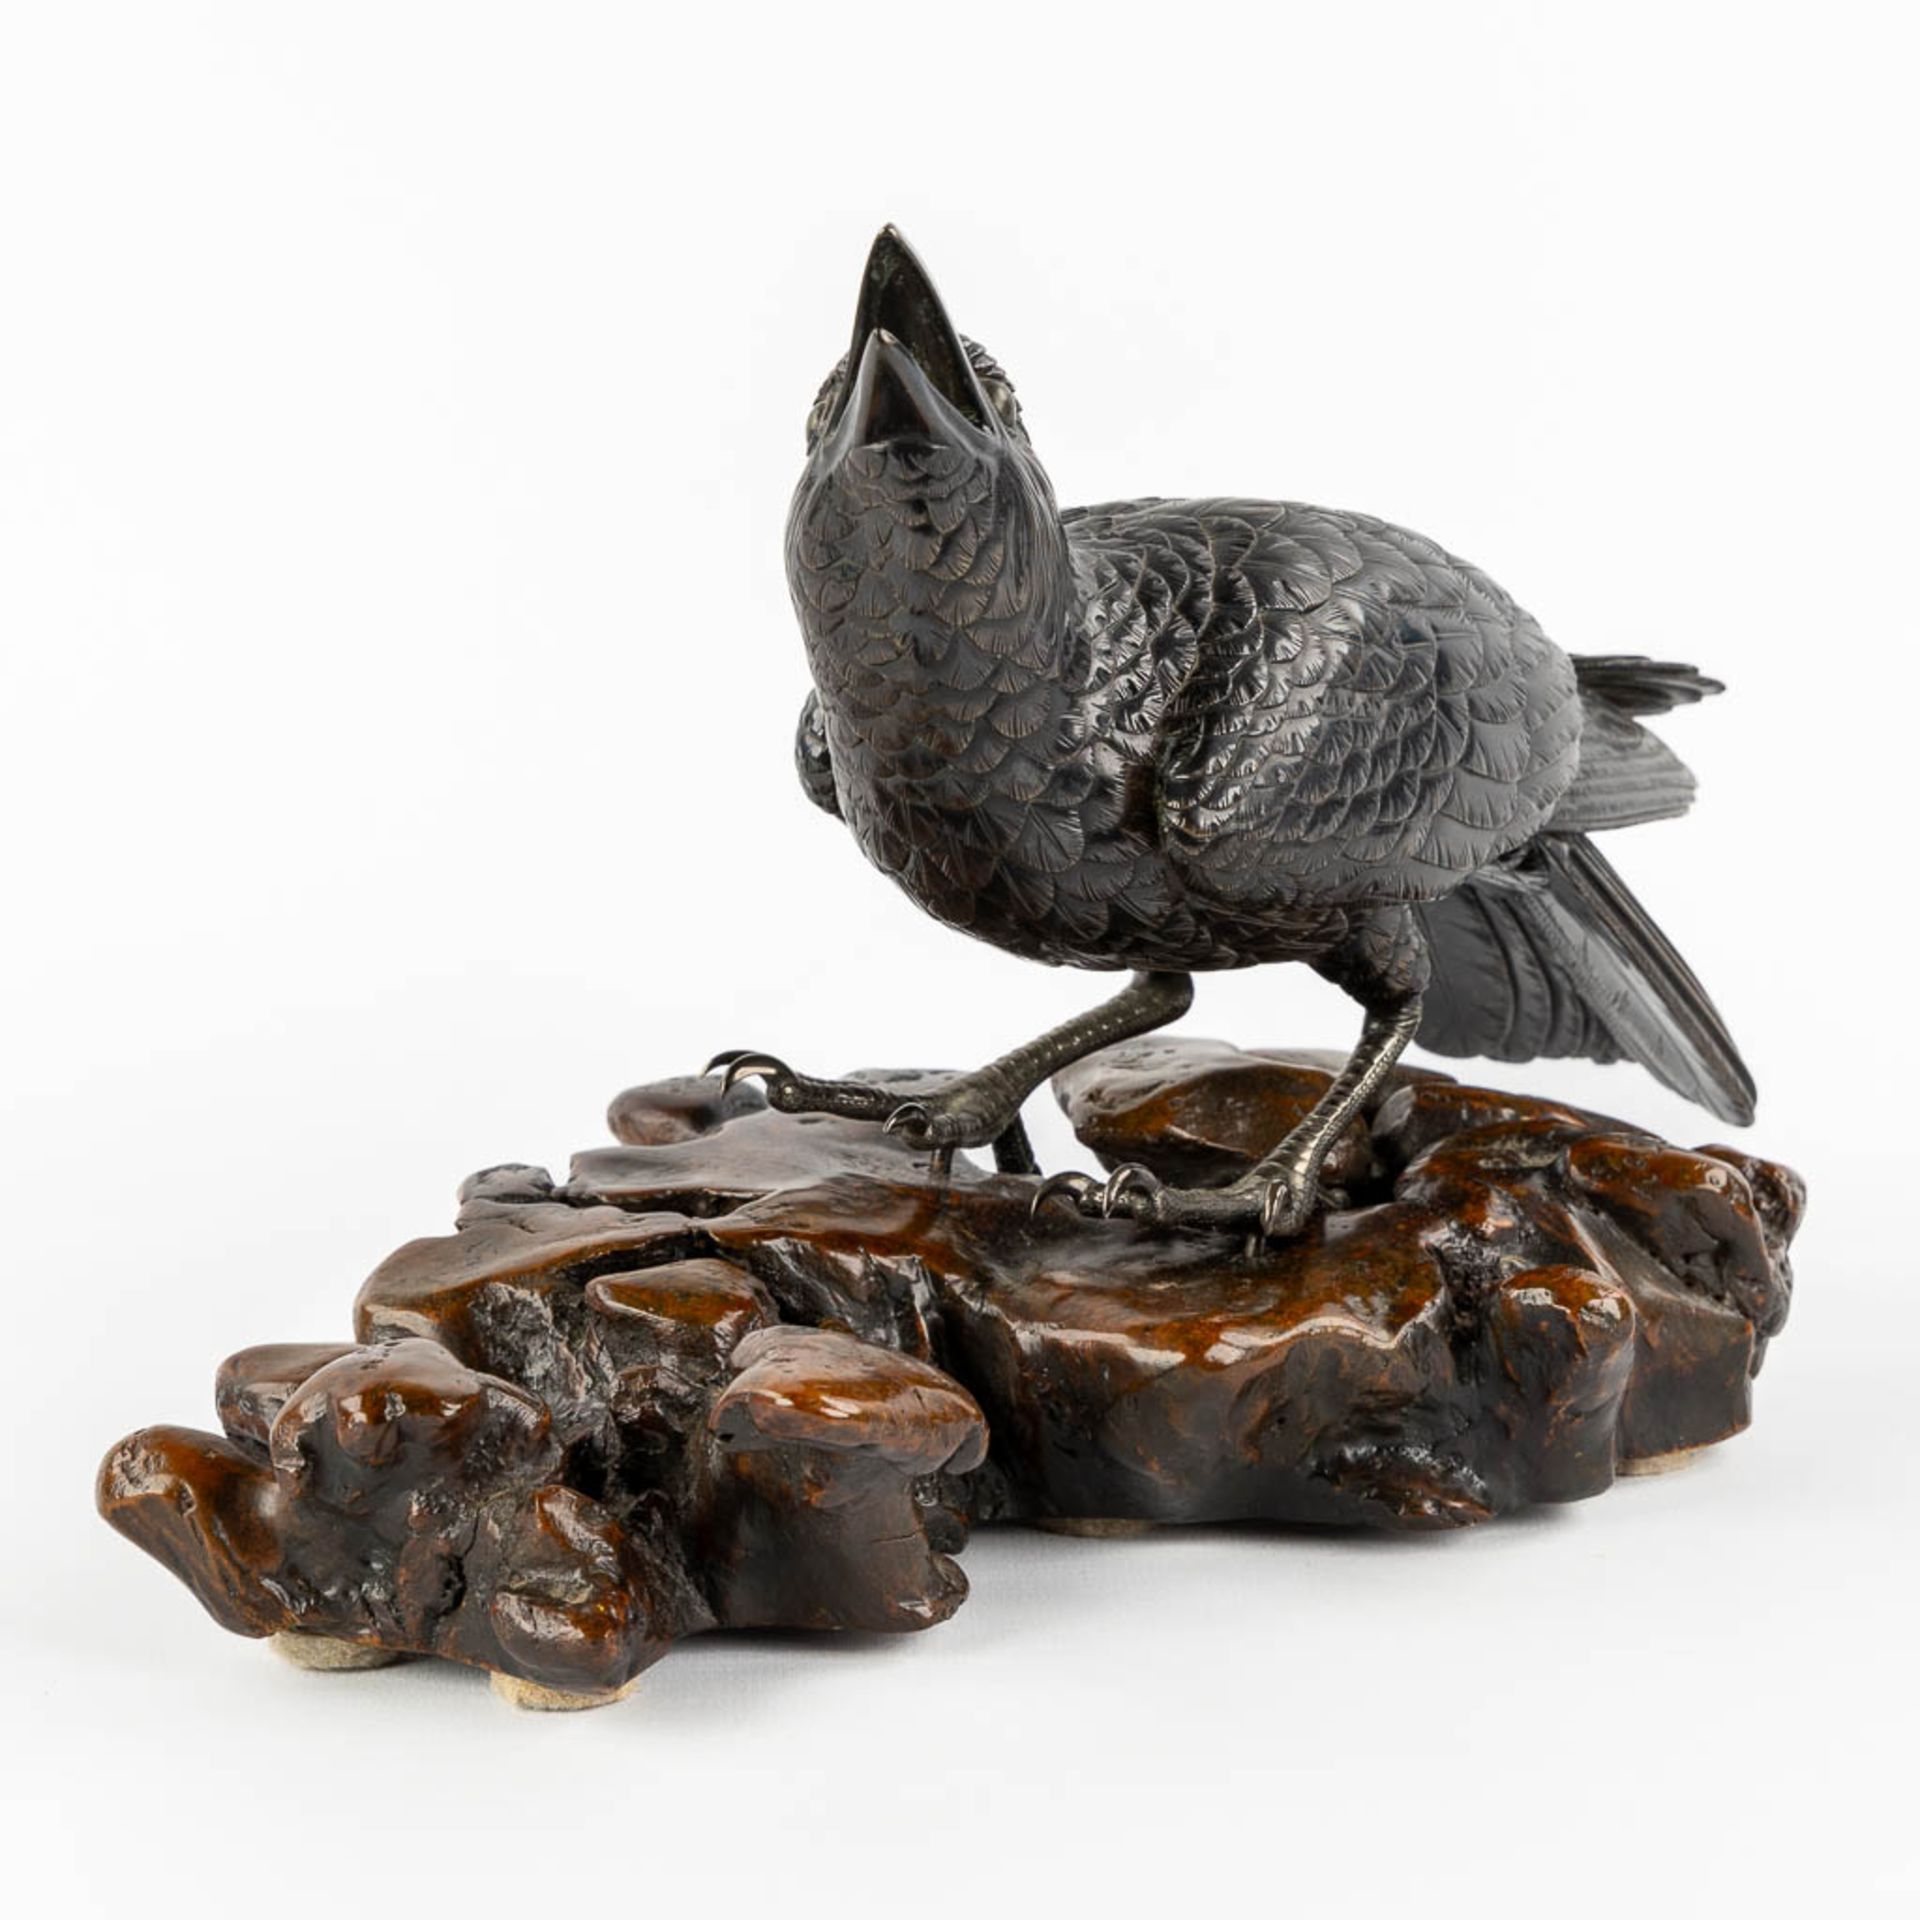 A Raven, patinated bronze mounted on a wood base. Probably Japan. (L:17 x W:30 x H:17 cm) - Image 3 of 10